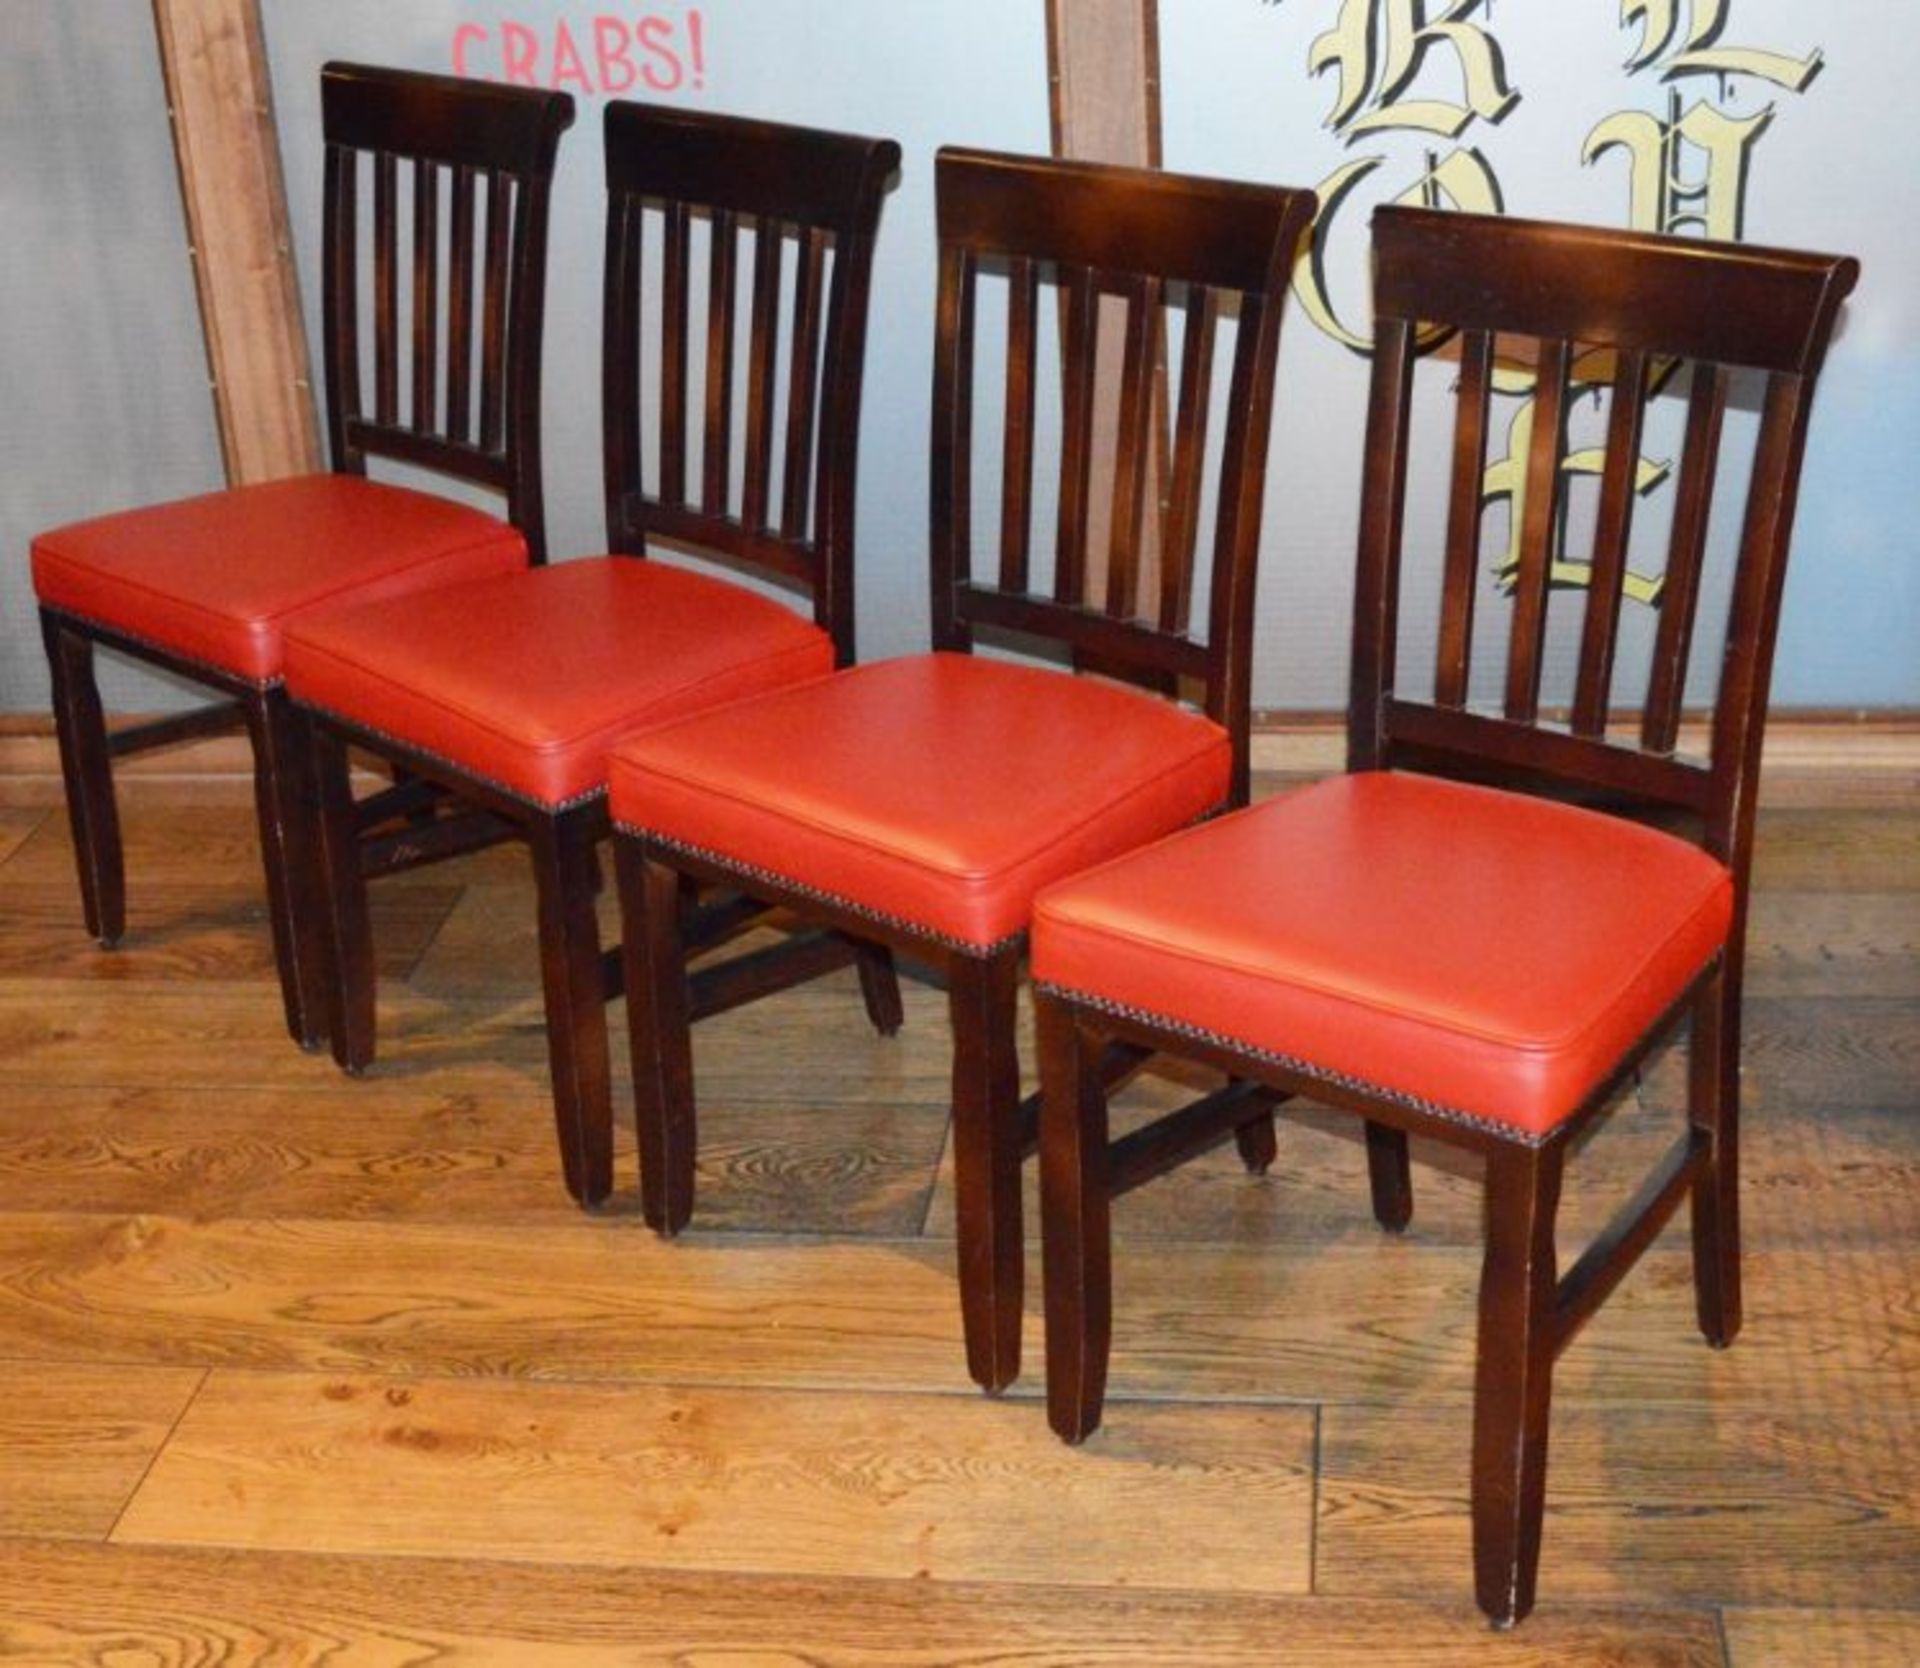 16 x Restaurant Dining Chairs With Dark Stained Wood Finish and Red Leather Seat Pads